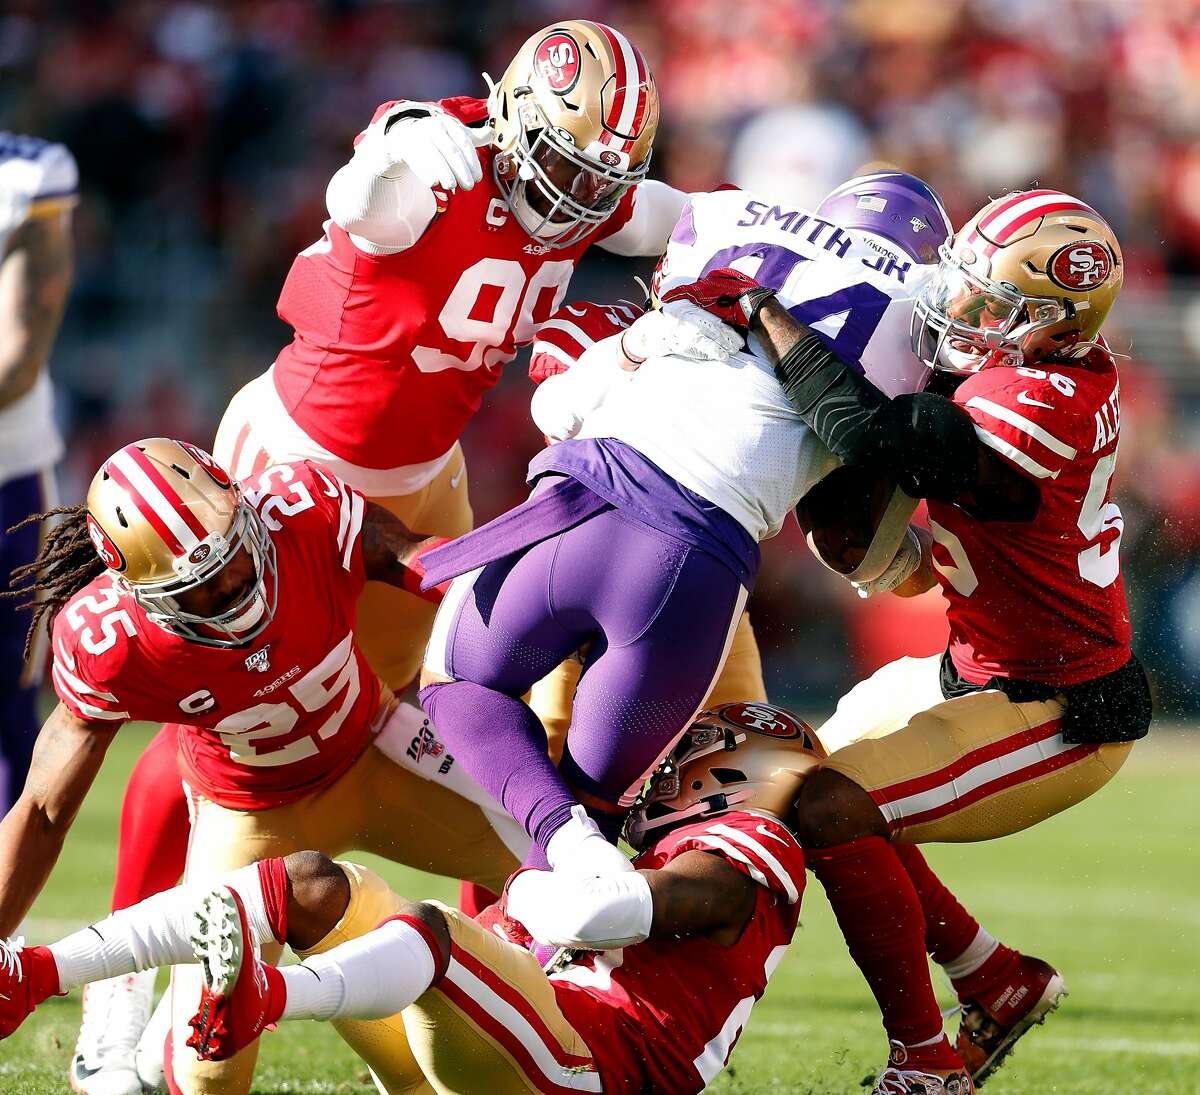 San Francisco 49ers' Kwon Alexander, DeForest Buckner, Richard Sherman and Jimmie Ward team up to stop Minnesota Vikings' Irv Smith, Jr. in 1st quarter of Niners' 27-10 win during NFC Divisional playoff game at Levi's Stadium in Santa Clara, Calif., on Saturday, January 11, 2020.